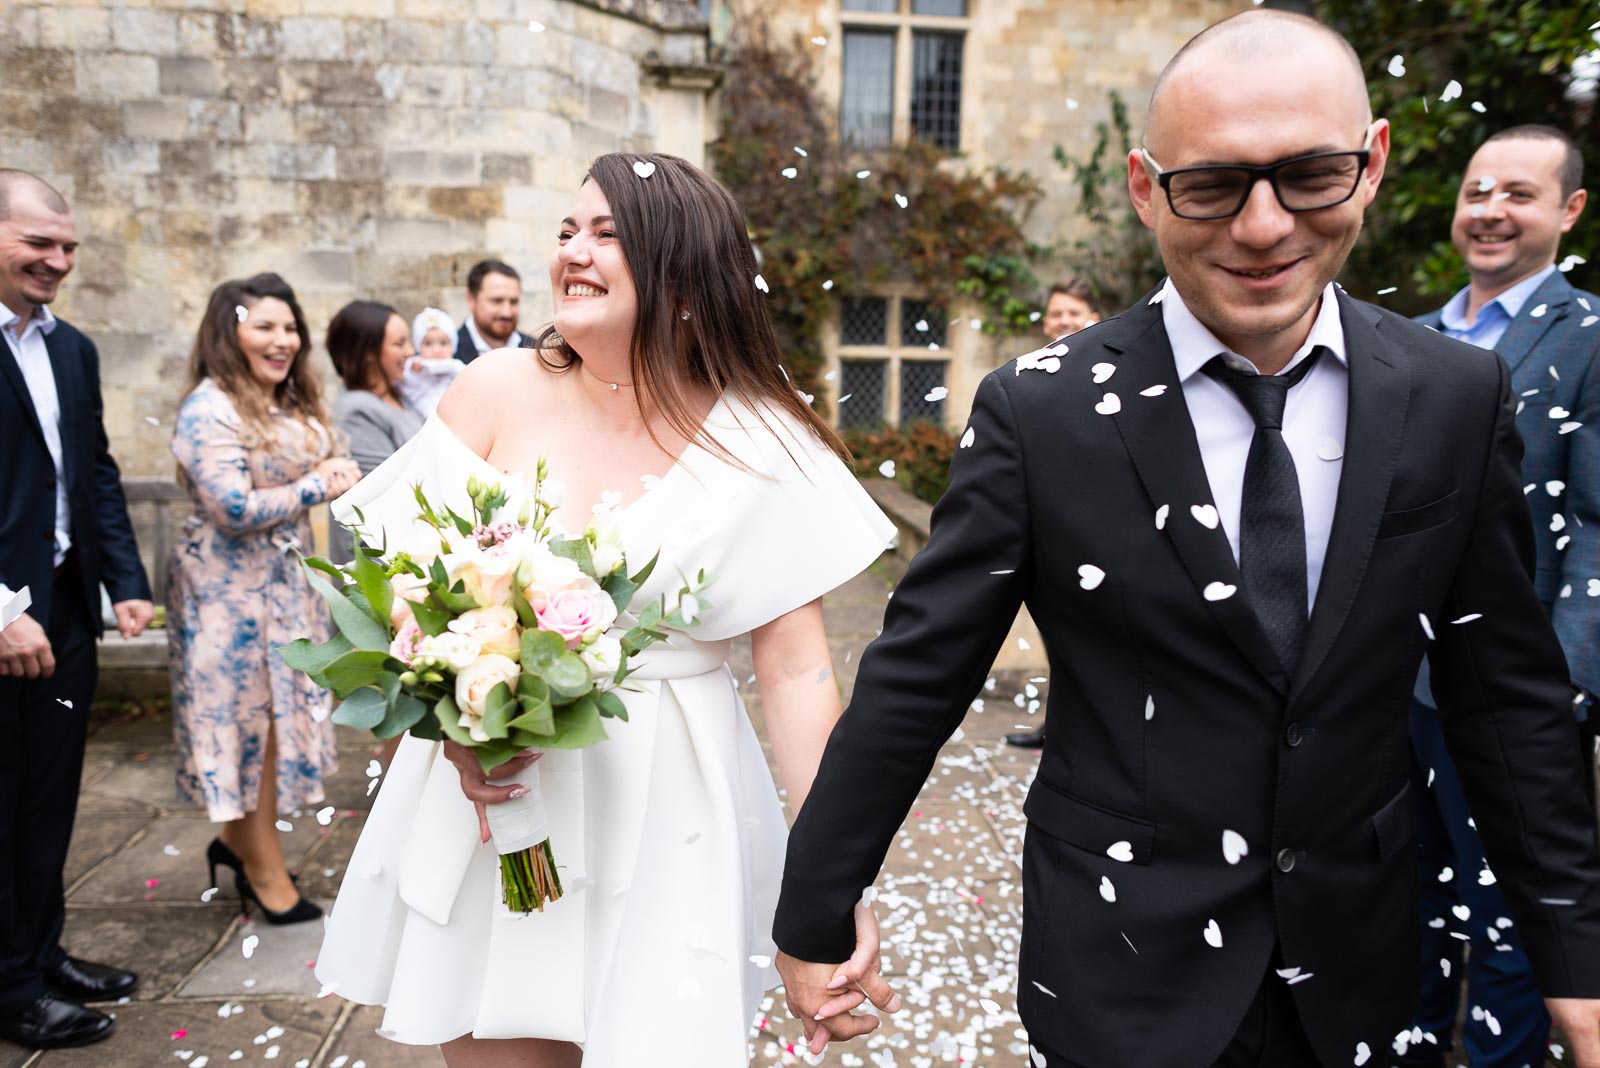 Guests throw confetti outside Lewes Register Office over Robert and Maria after their wedding.